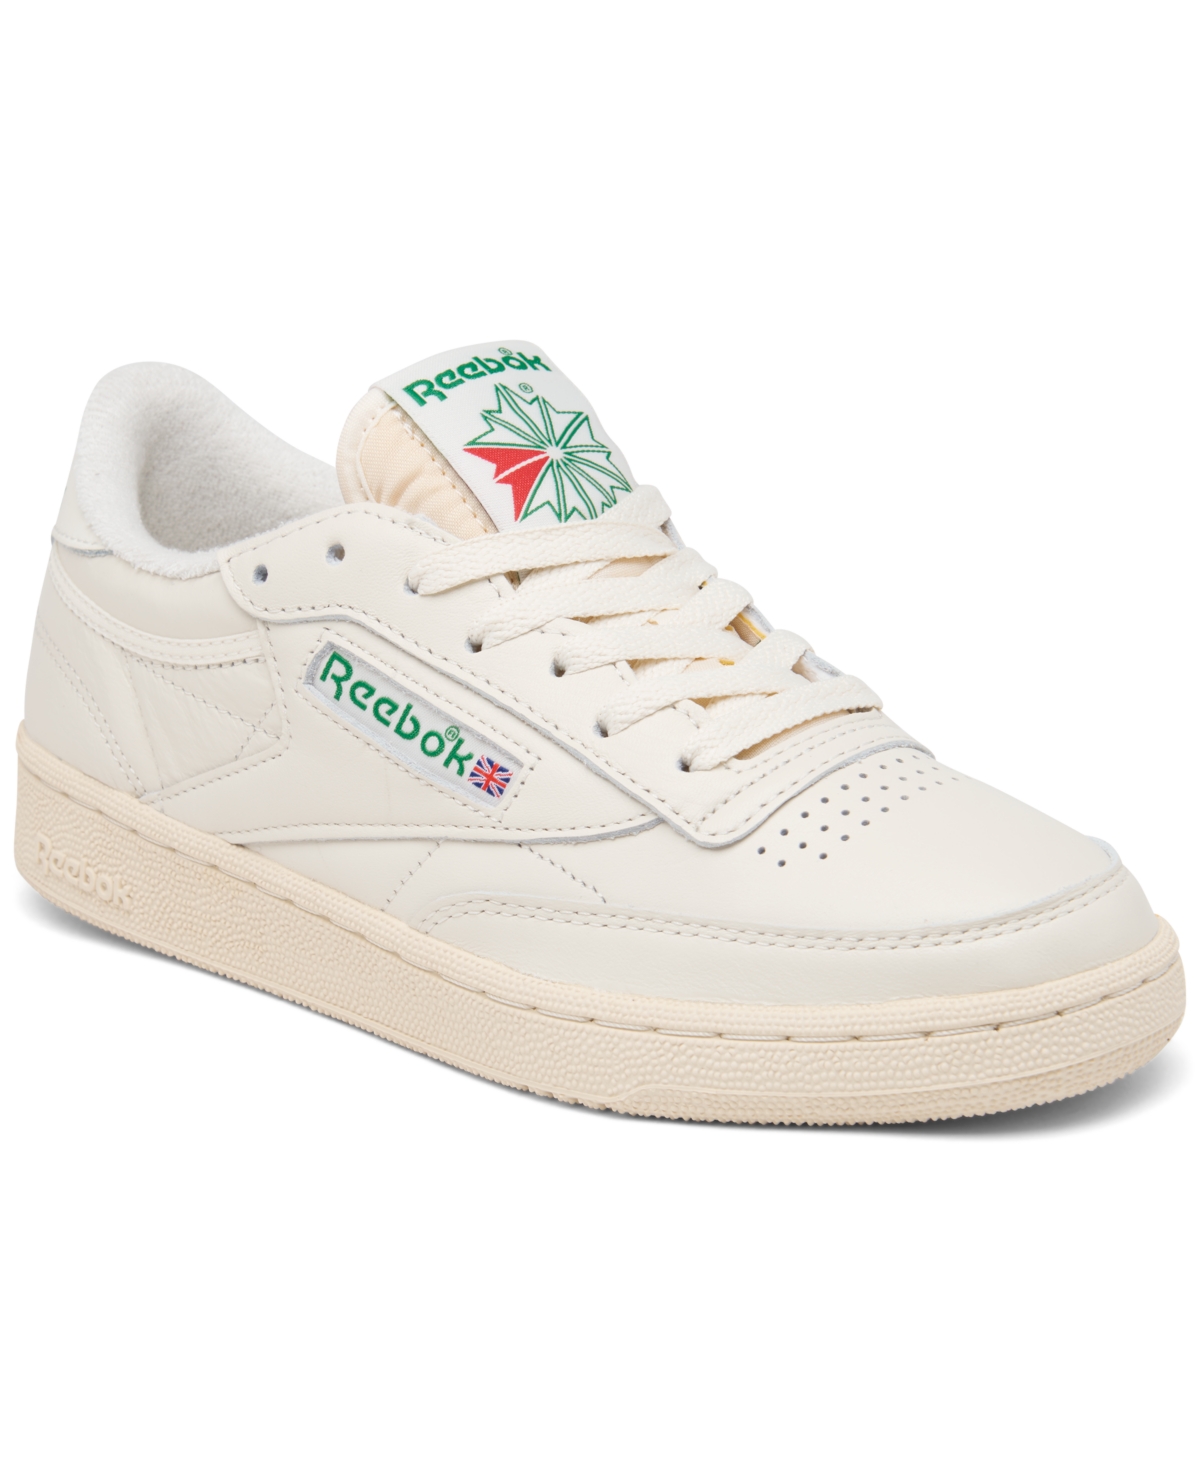 Reebok Club C 85 Casual Sneakers from Finish Line - Macy's